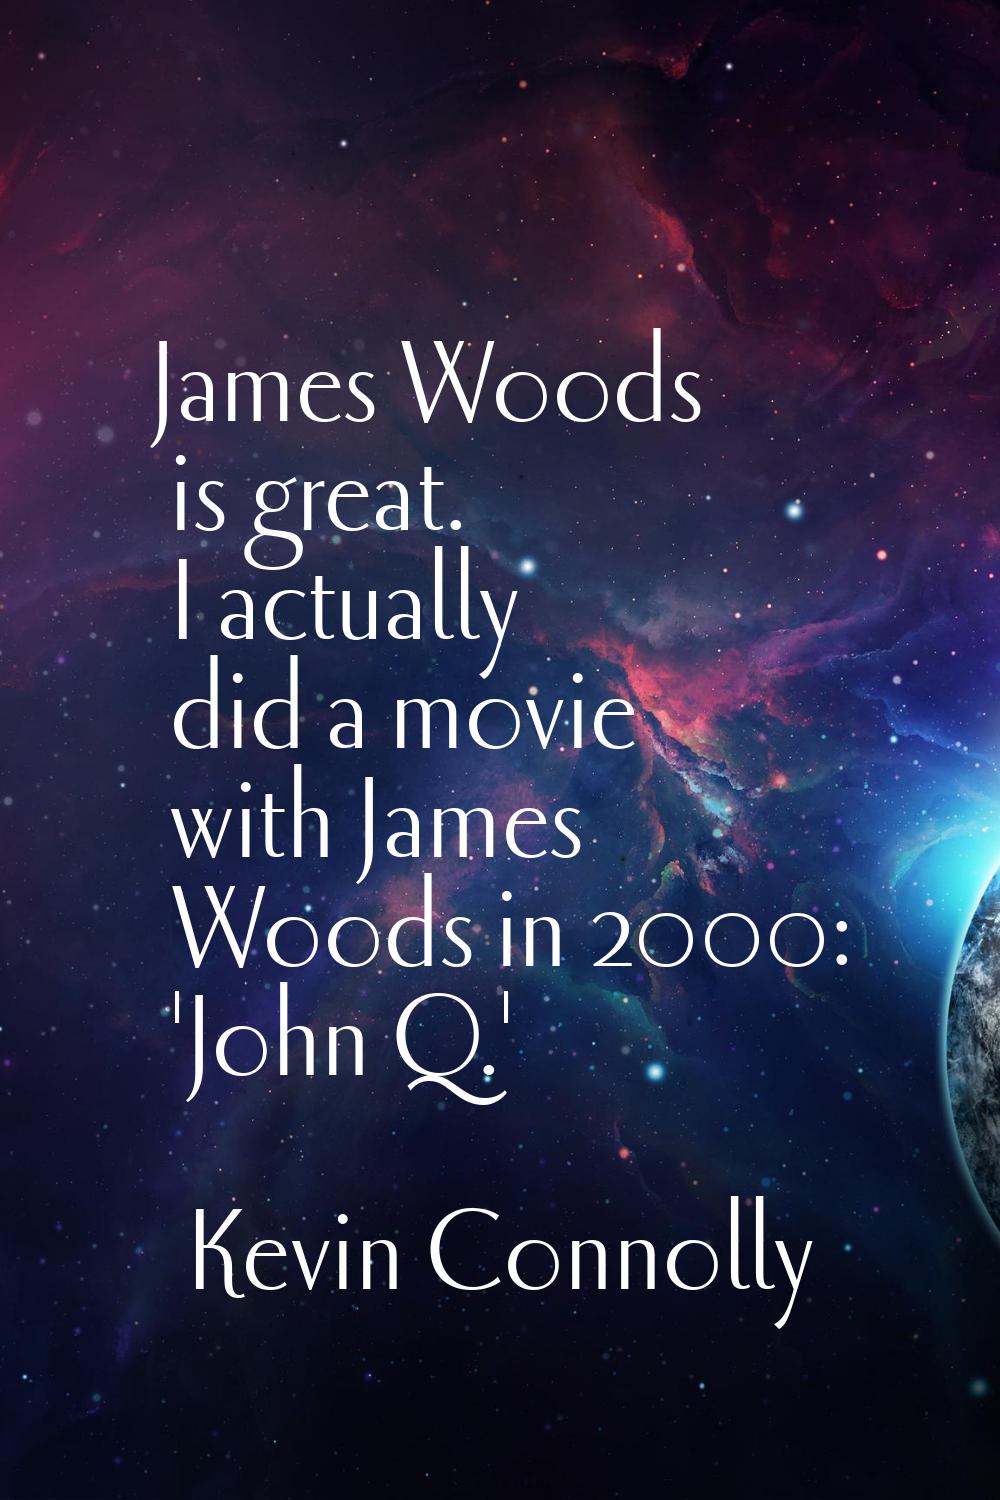 James Woods is great. I actually did a movie with James Woods in 2000: 'John Q.'